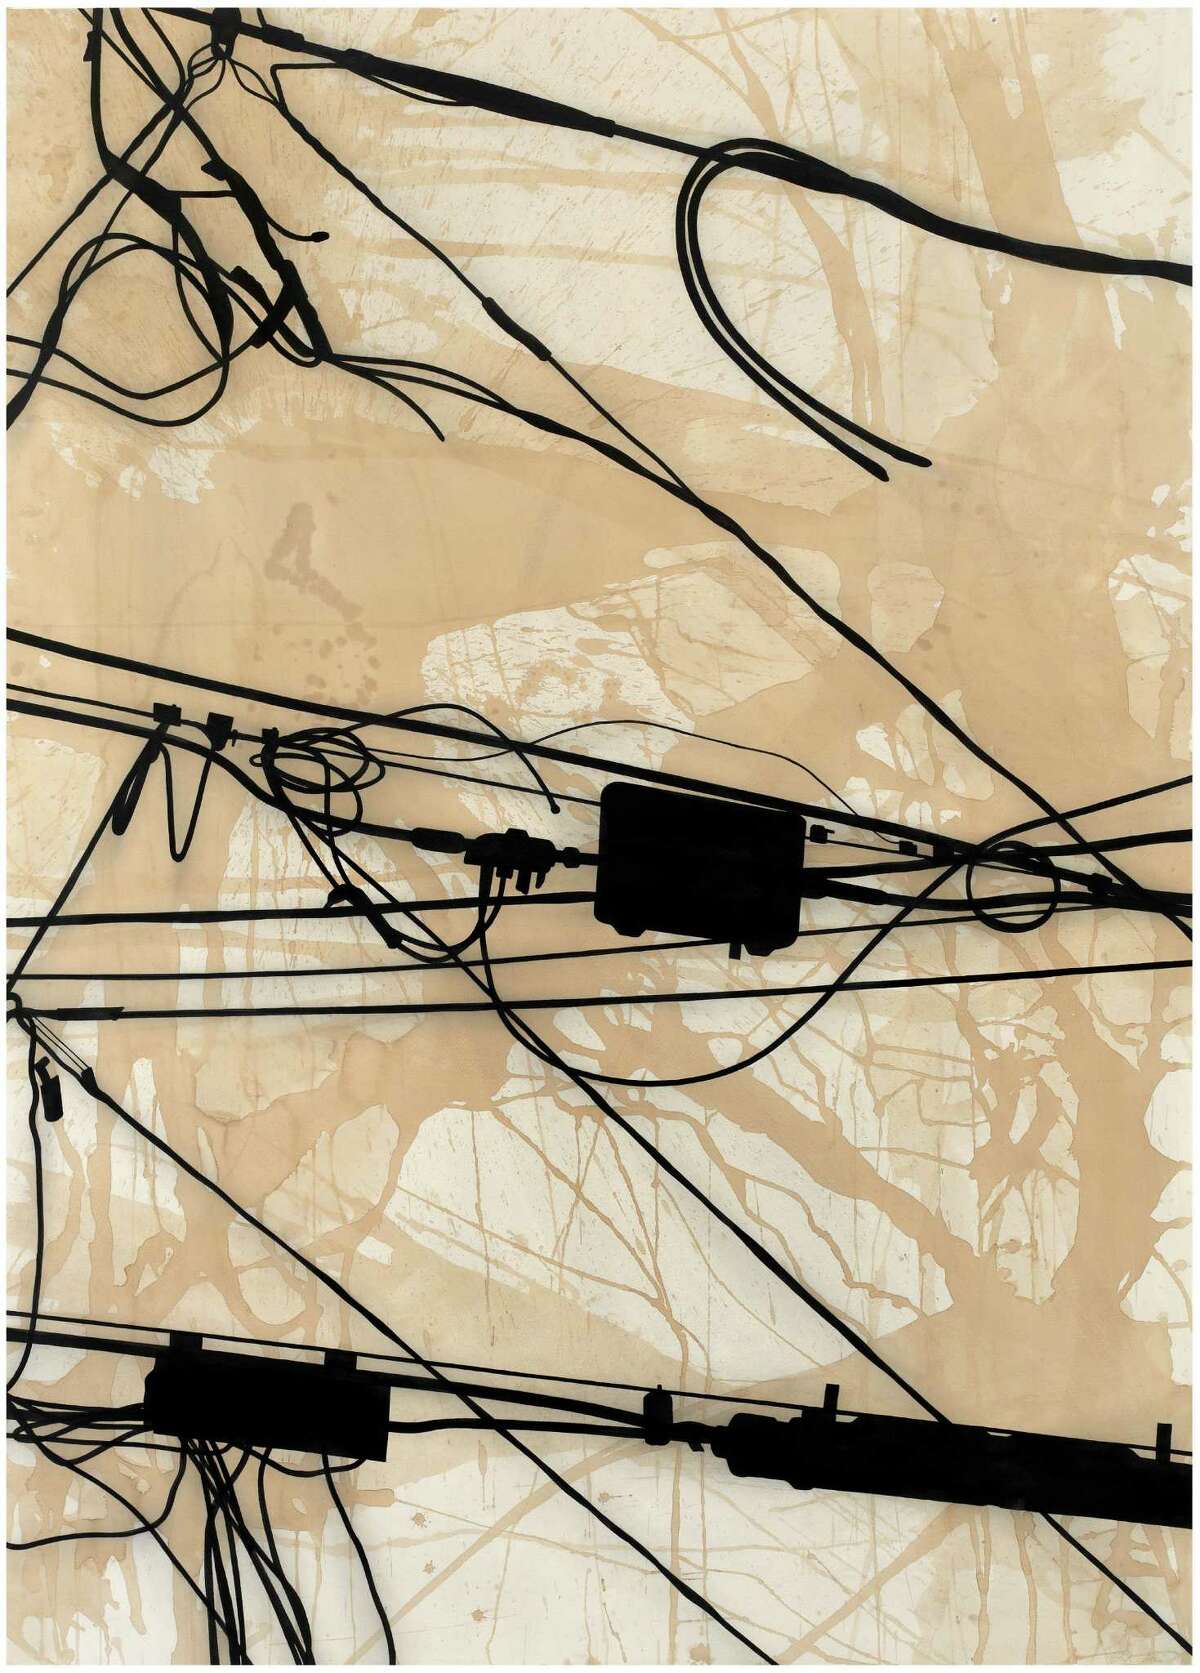 "Grid Your Lines" - a drawing made with coffee and ink - hangs at Hobby Airport.